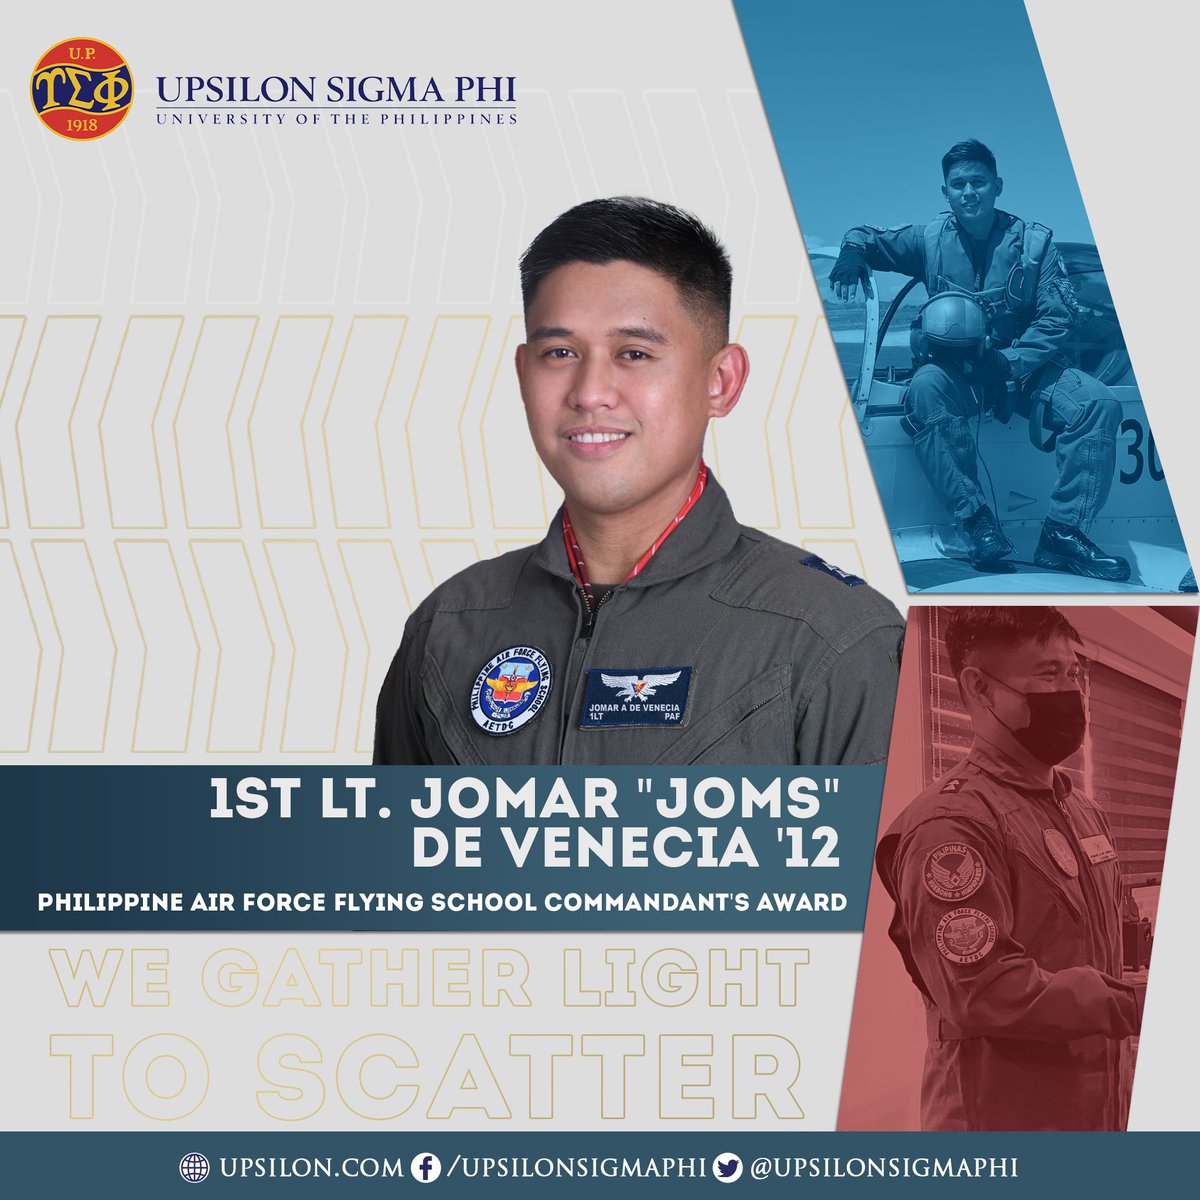 The #UpsilonSigmaPhi congratulates 𝟭𝘀𝘁 𝗟𝘁. 𝗝𝗼𝗺𝘀 𝗗𝗲 𝗩𝗲𝗻𝗲𝗰𝗶𝗮 '𝟭𝟮 for being conferred the @PhilAirForce (PAF) Flying School Commandant's Medal Award.

#PhilippineAirForce
#UpsilonLeads
#UpsilonParaSaBayan
#UPManila
#CelebratingExcellence
#ImperativeOfService